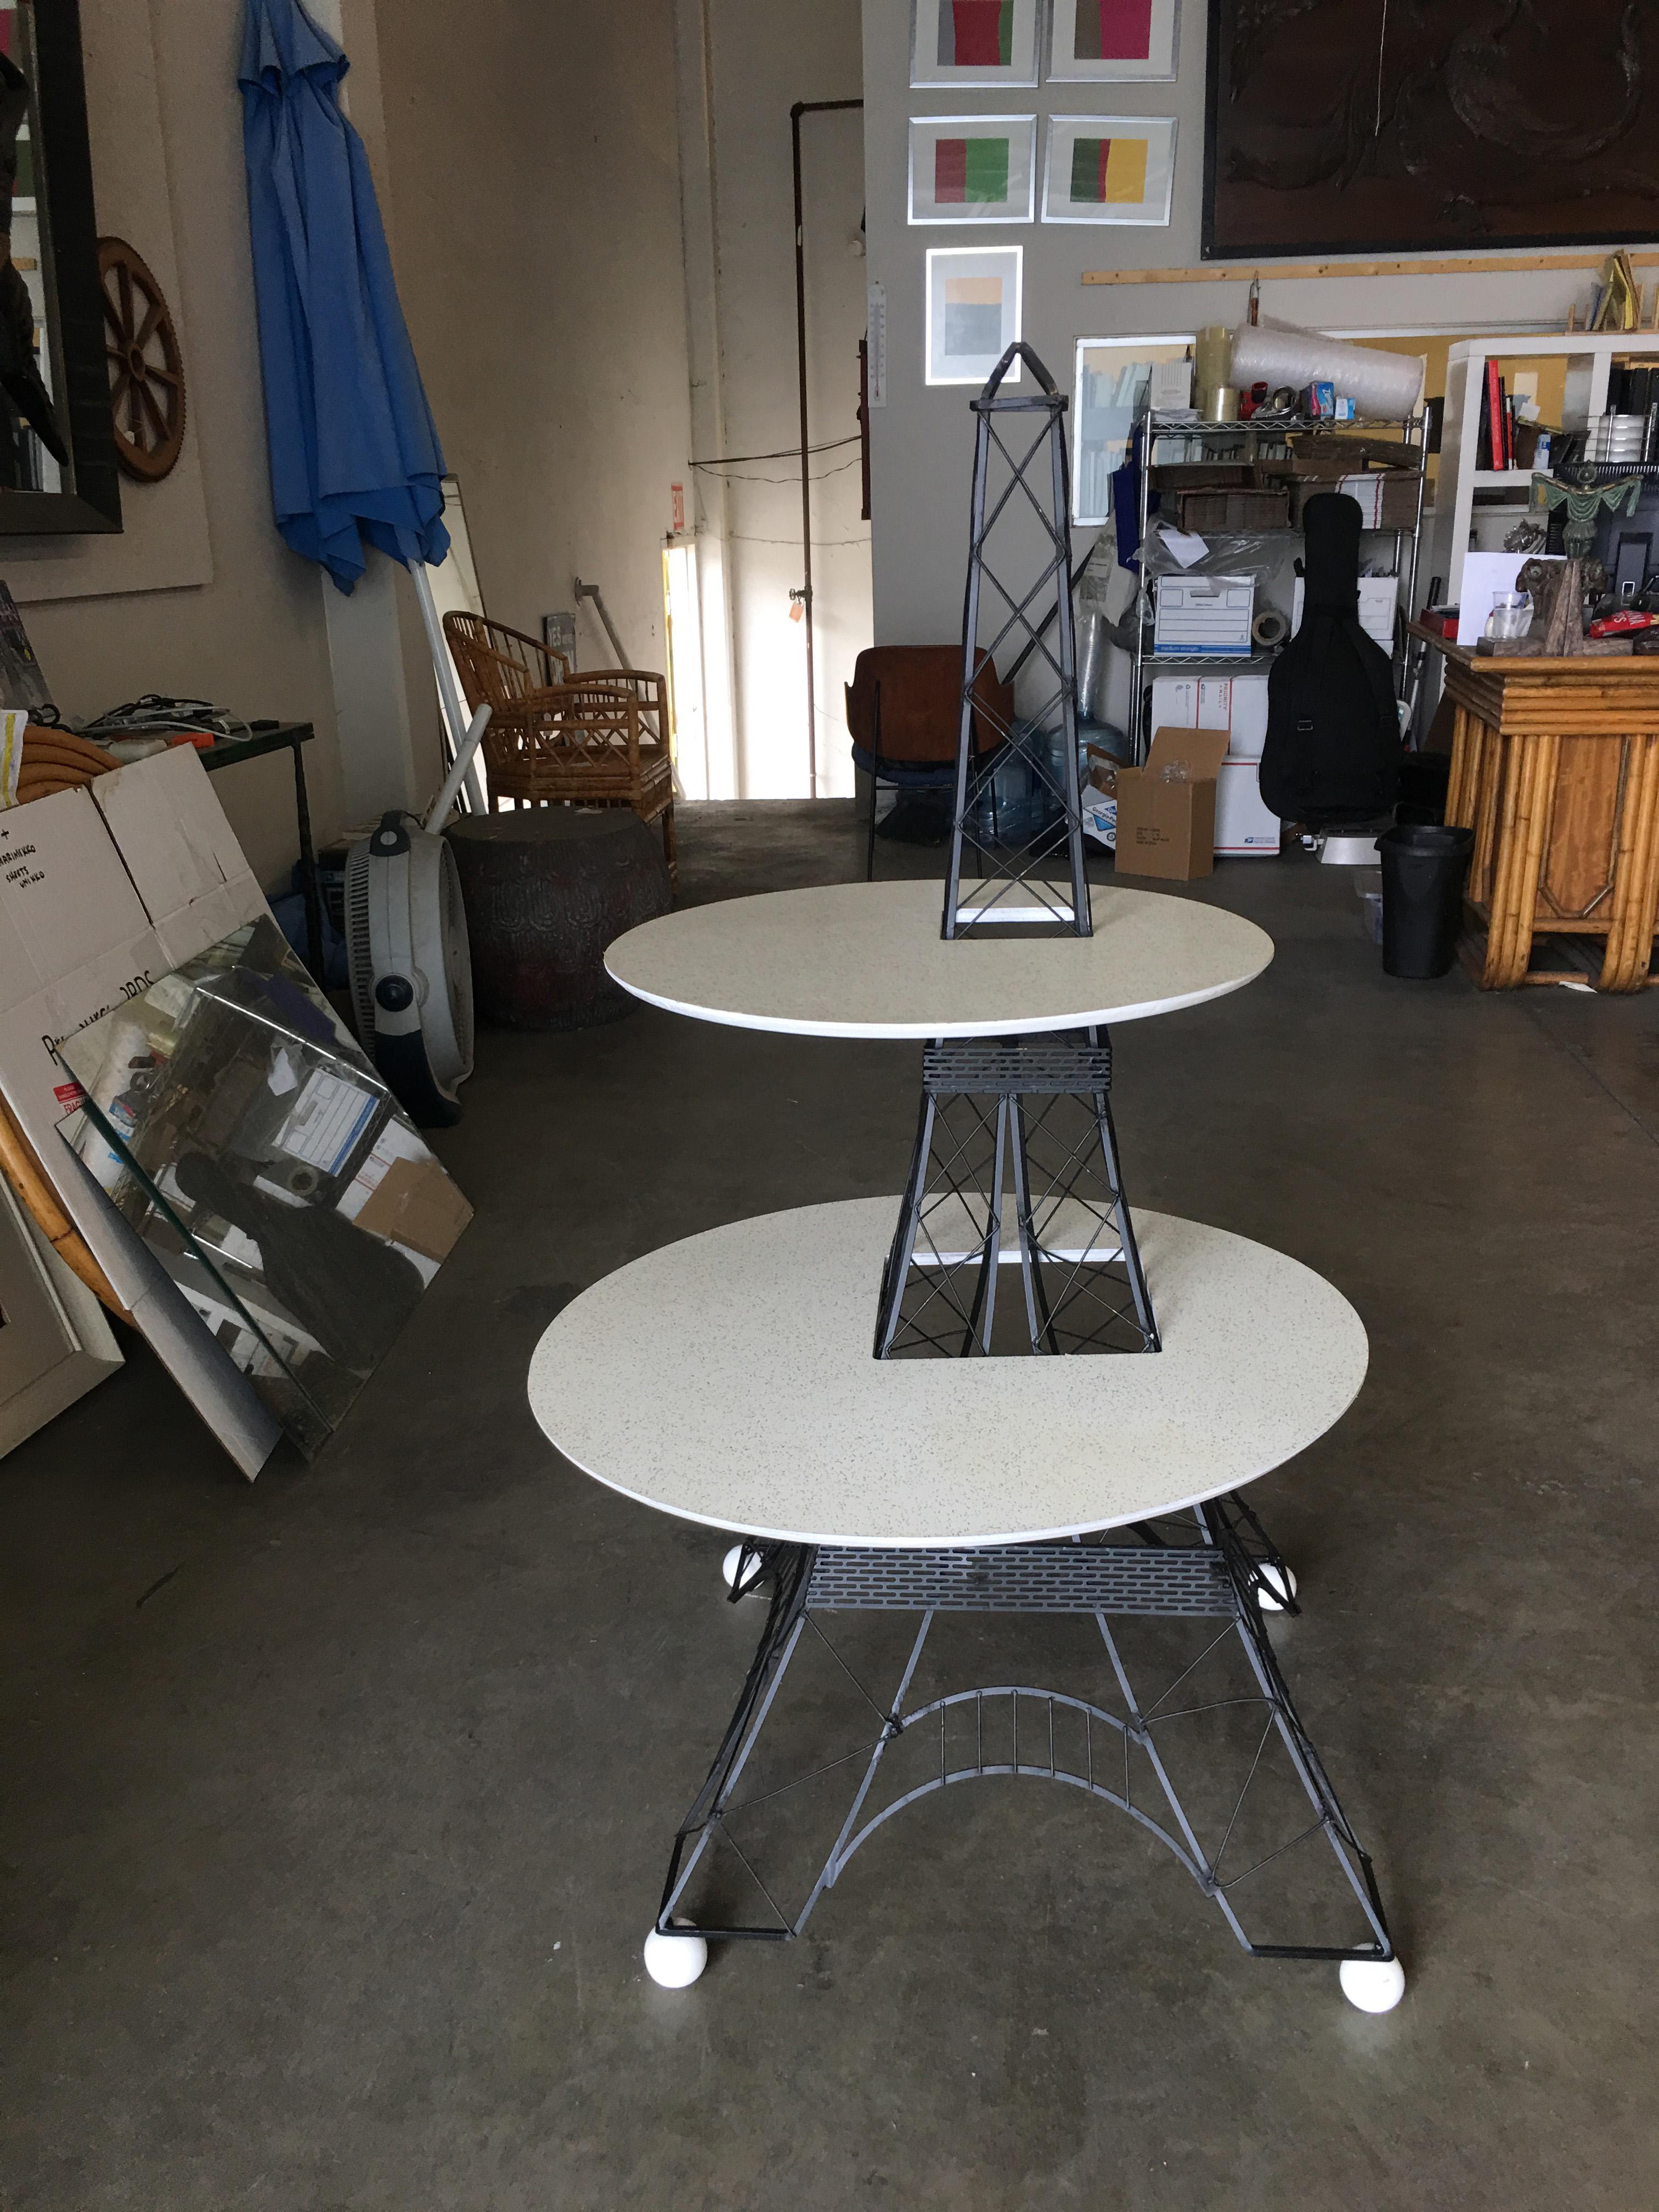 Mid Century era 2 tier Eiffel Tower sculptural side table made with a black painted solid brass wireframe table base and 2 Formica platforms. Table measures over 4' foot tall.

Dimensions: 49